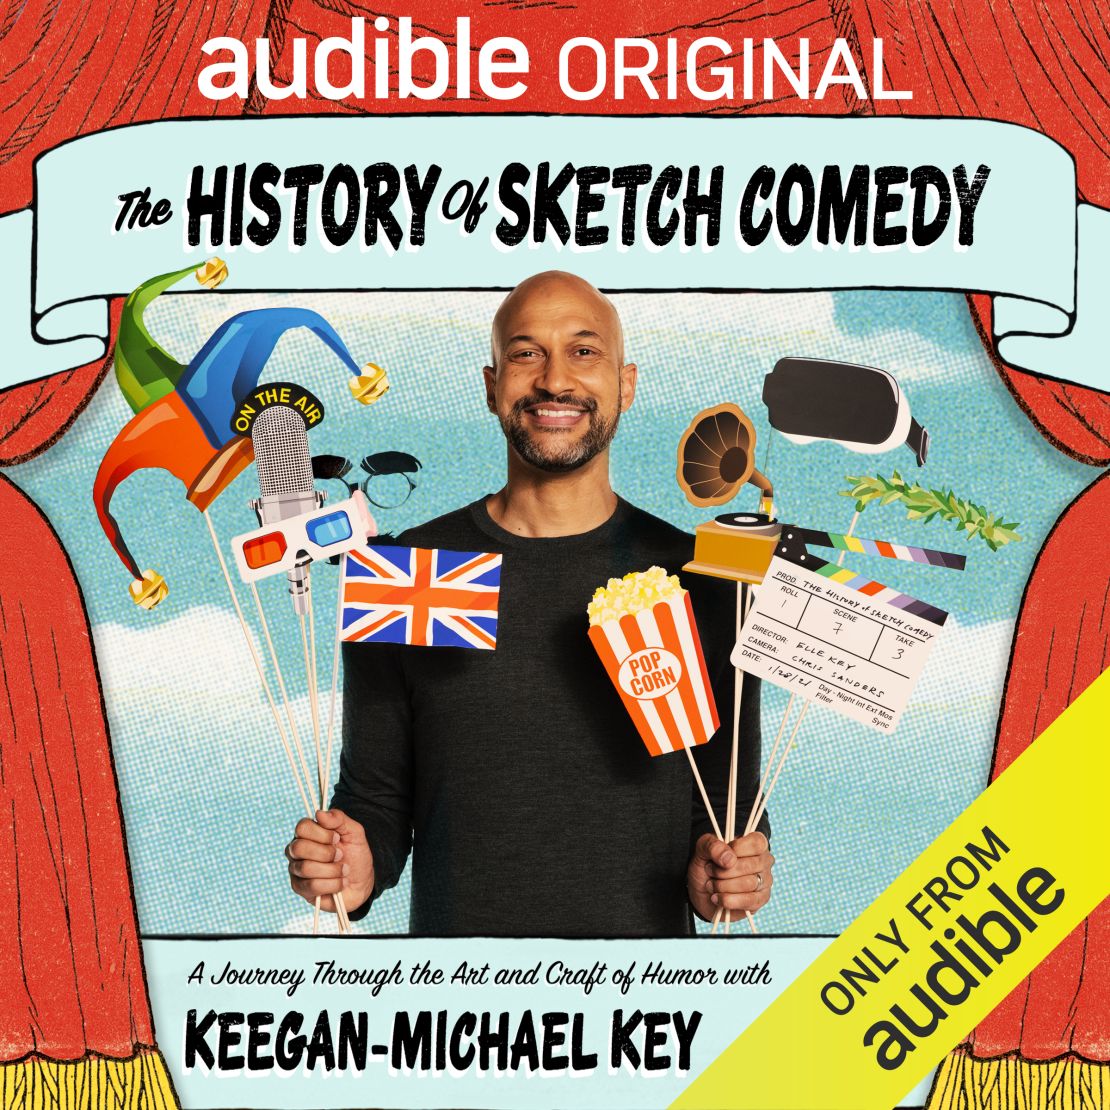 Emmy and Peabody award-winning actor, writer and producer Keegan-Michael Key narrates "The History of Sketch Comedy." 